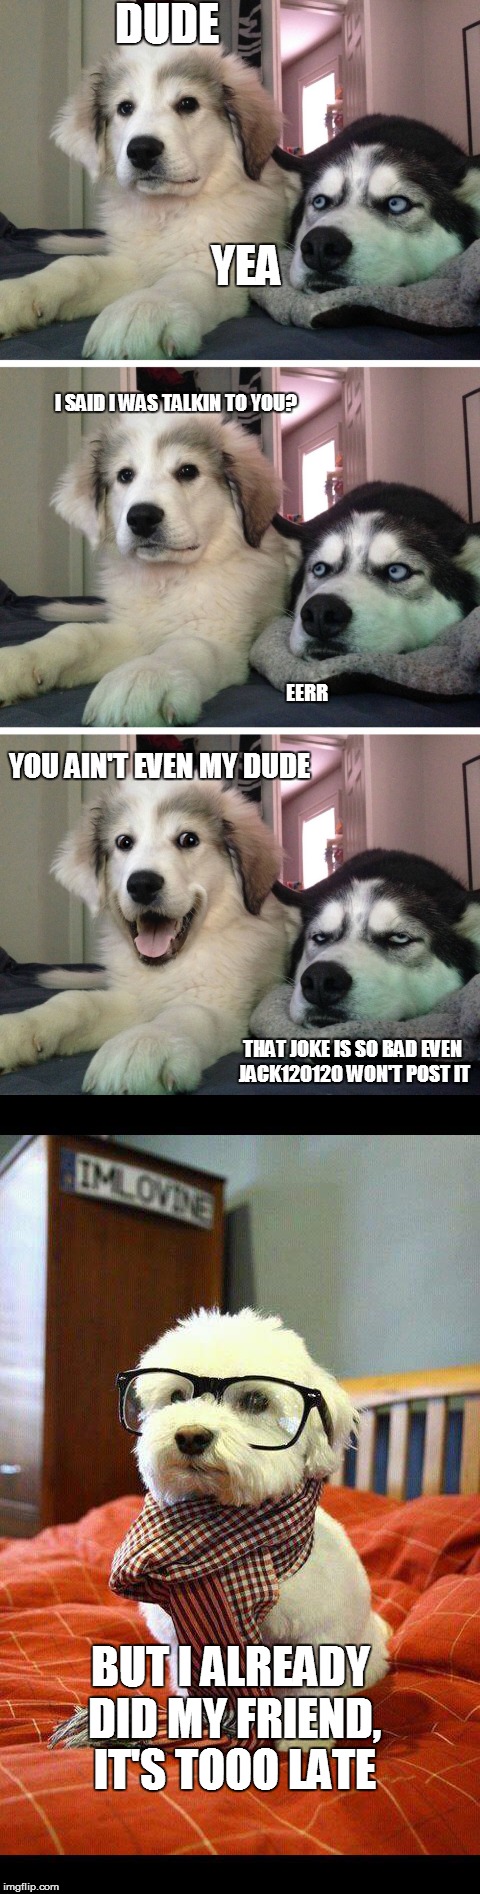 bad joke, but i always post bad jokes |  DUDE; YEA; I SAID I WAS TALKIN TO YOU? EERR; YOU AIN'T EVEN MY DUDE; THAT JOKE IS SO BAD EVEN JACK120120 WON'T POST IT; BUT I ALREADY DID MY FRIEND, IT'S TOOO LATE | image tagged in bad pun dogs,myself as dog,bad joke post | made w/ Imgflip meme maker